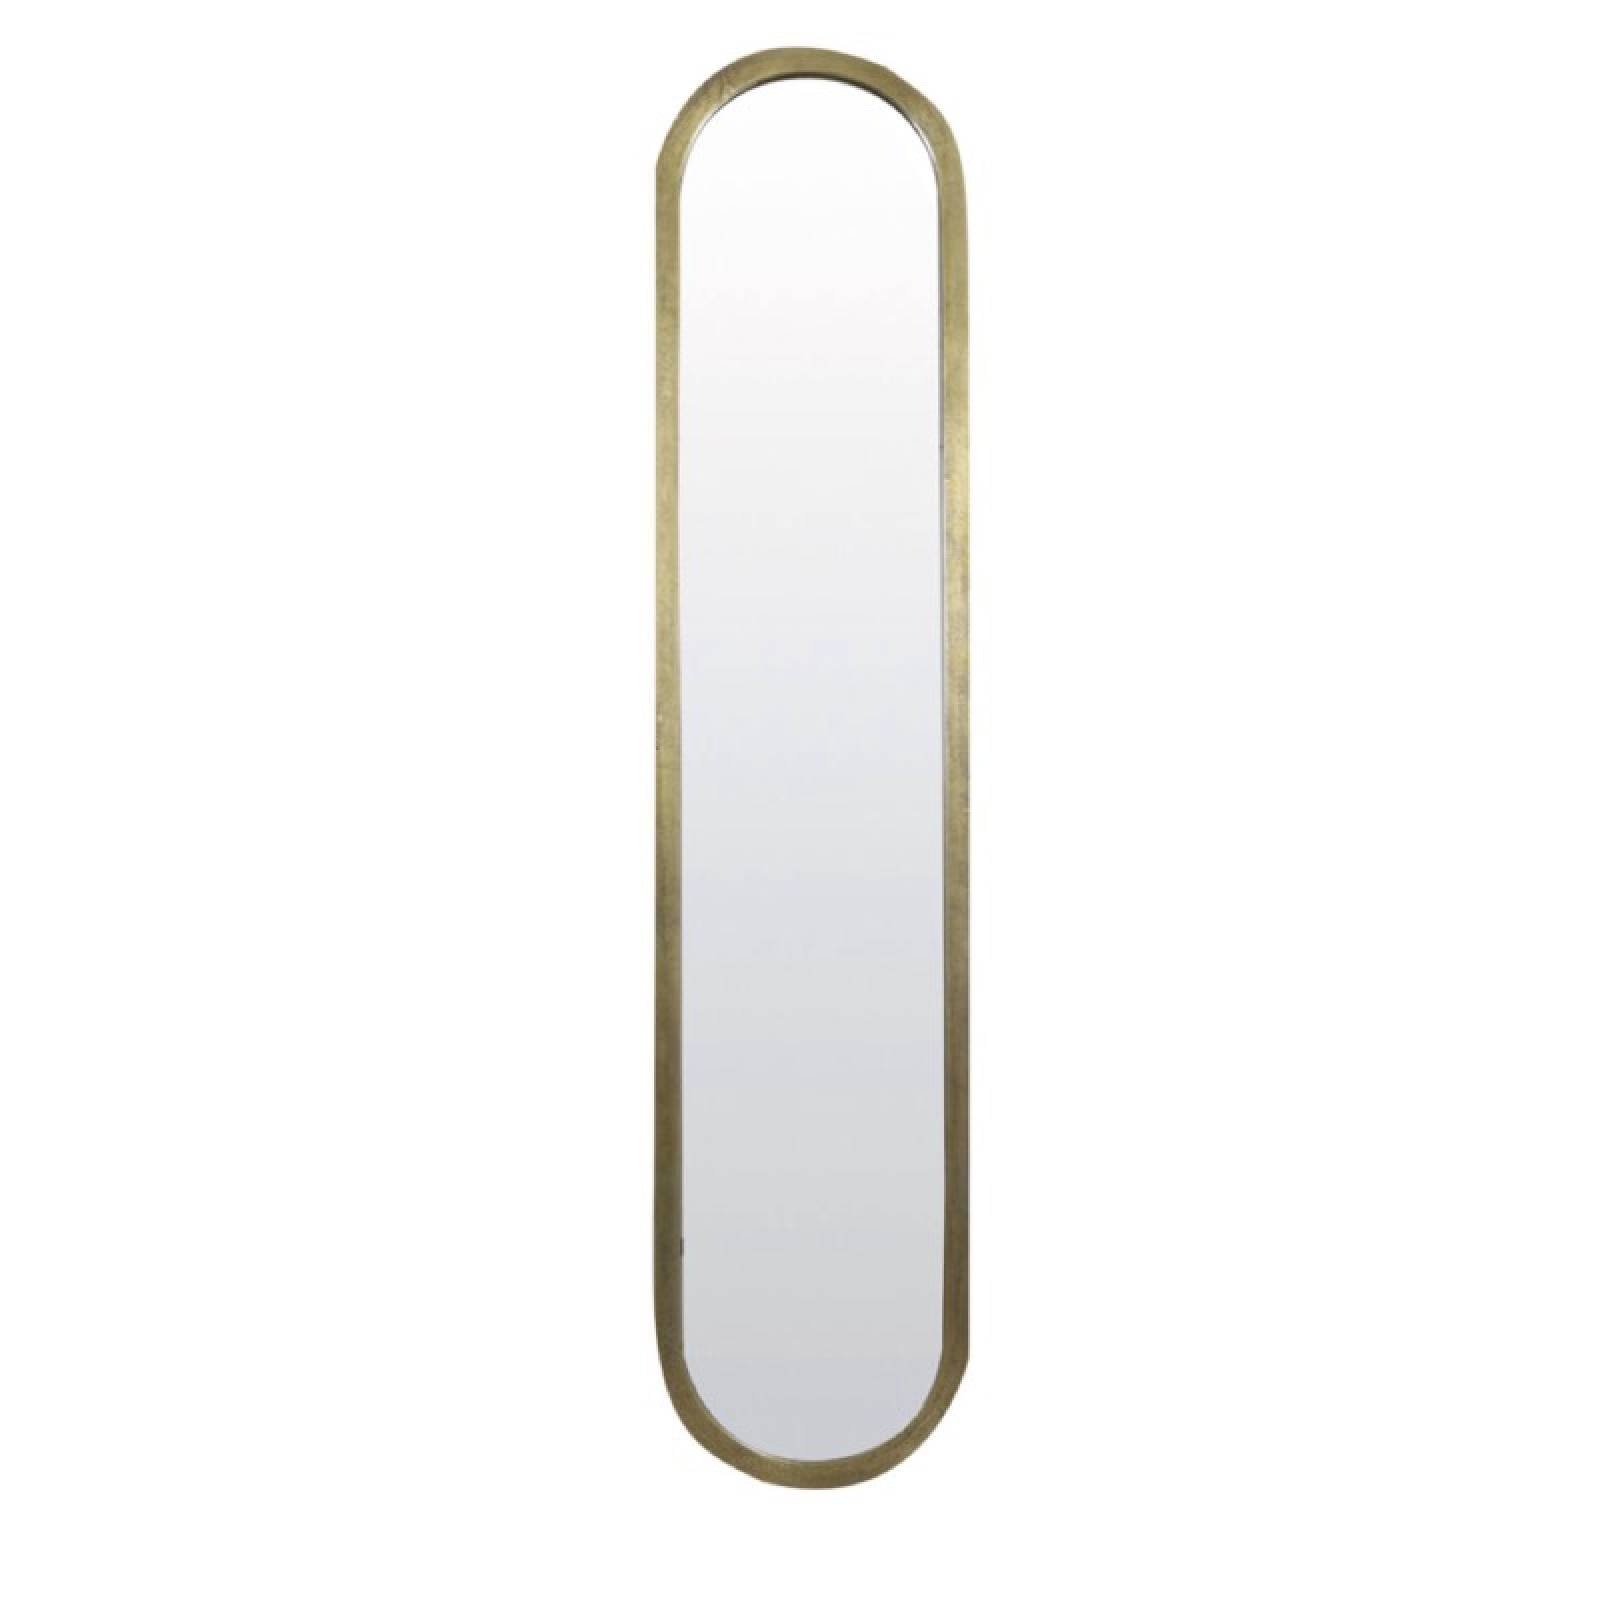 Large Long Curved Farah Mirror in Gold 38x175cm